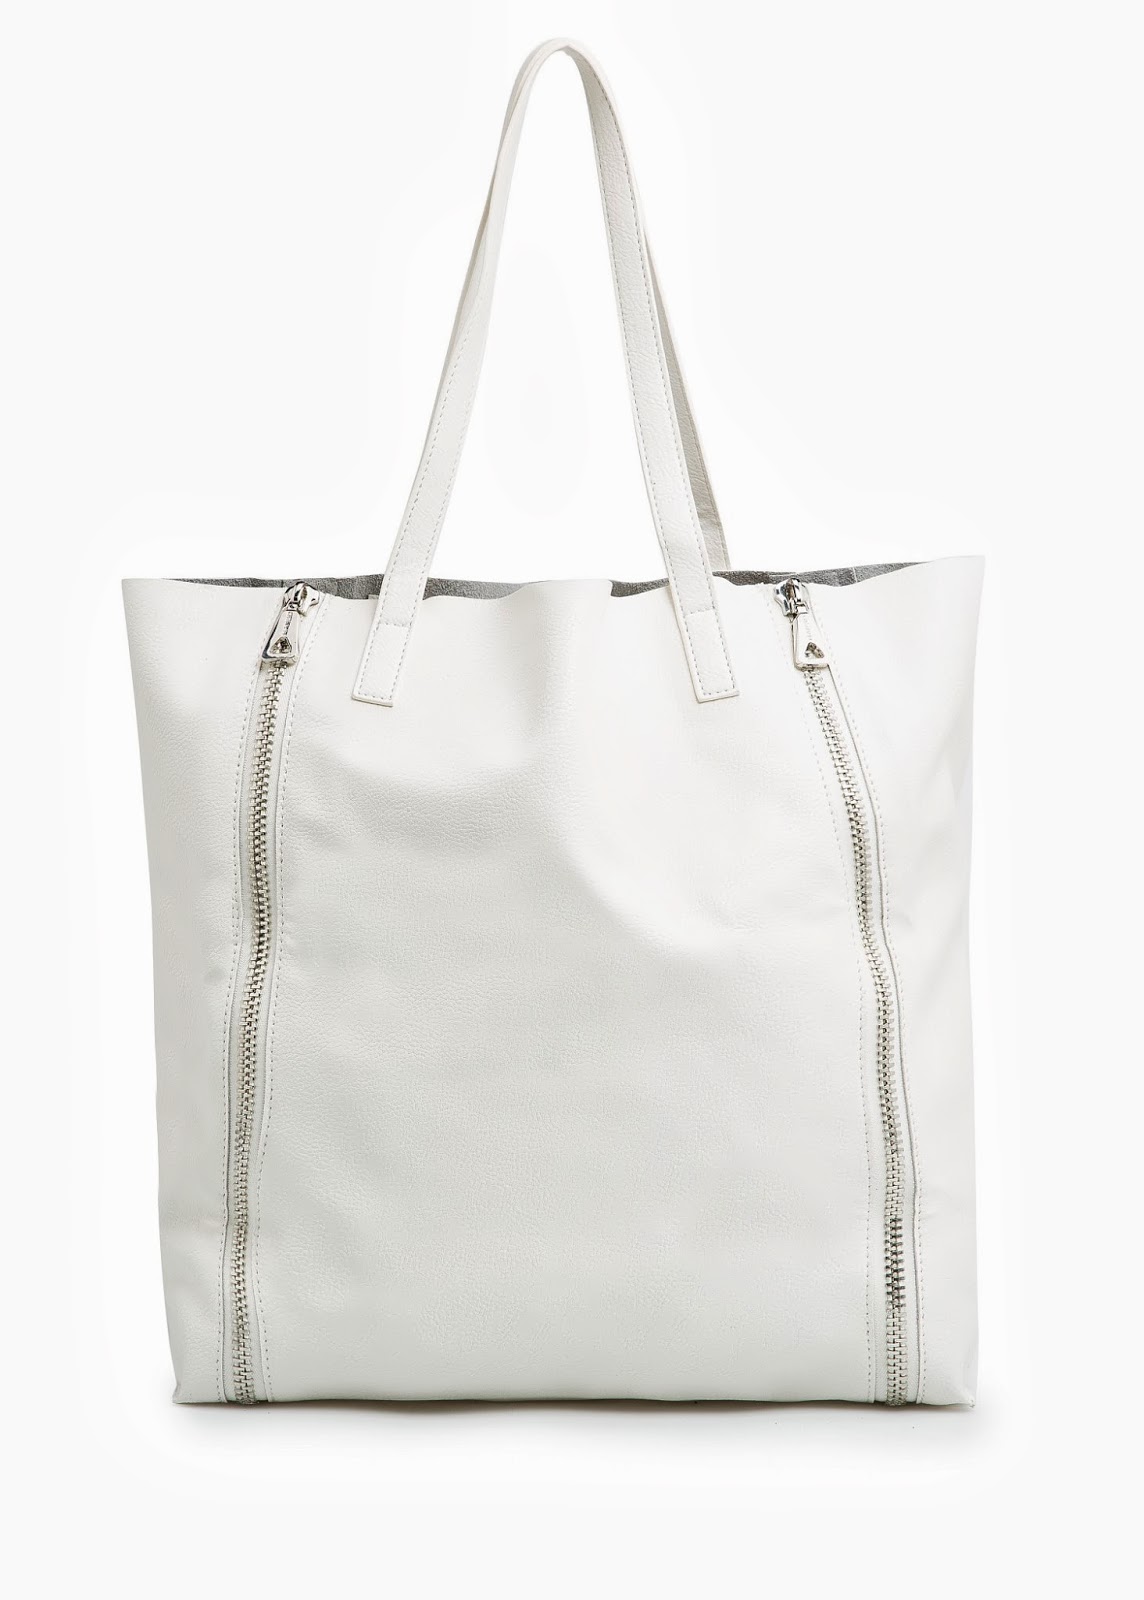 LOOK FOR LESS: Celine Cabas Zip Tote | The Trend Diaries - Latest ...  